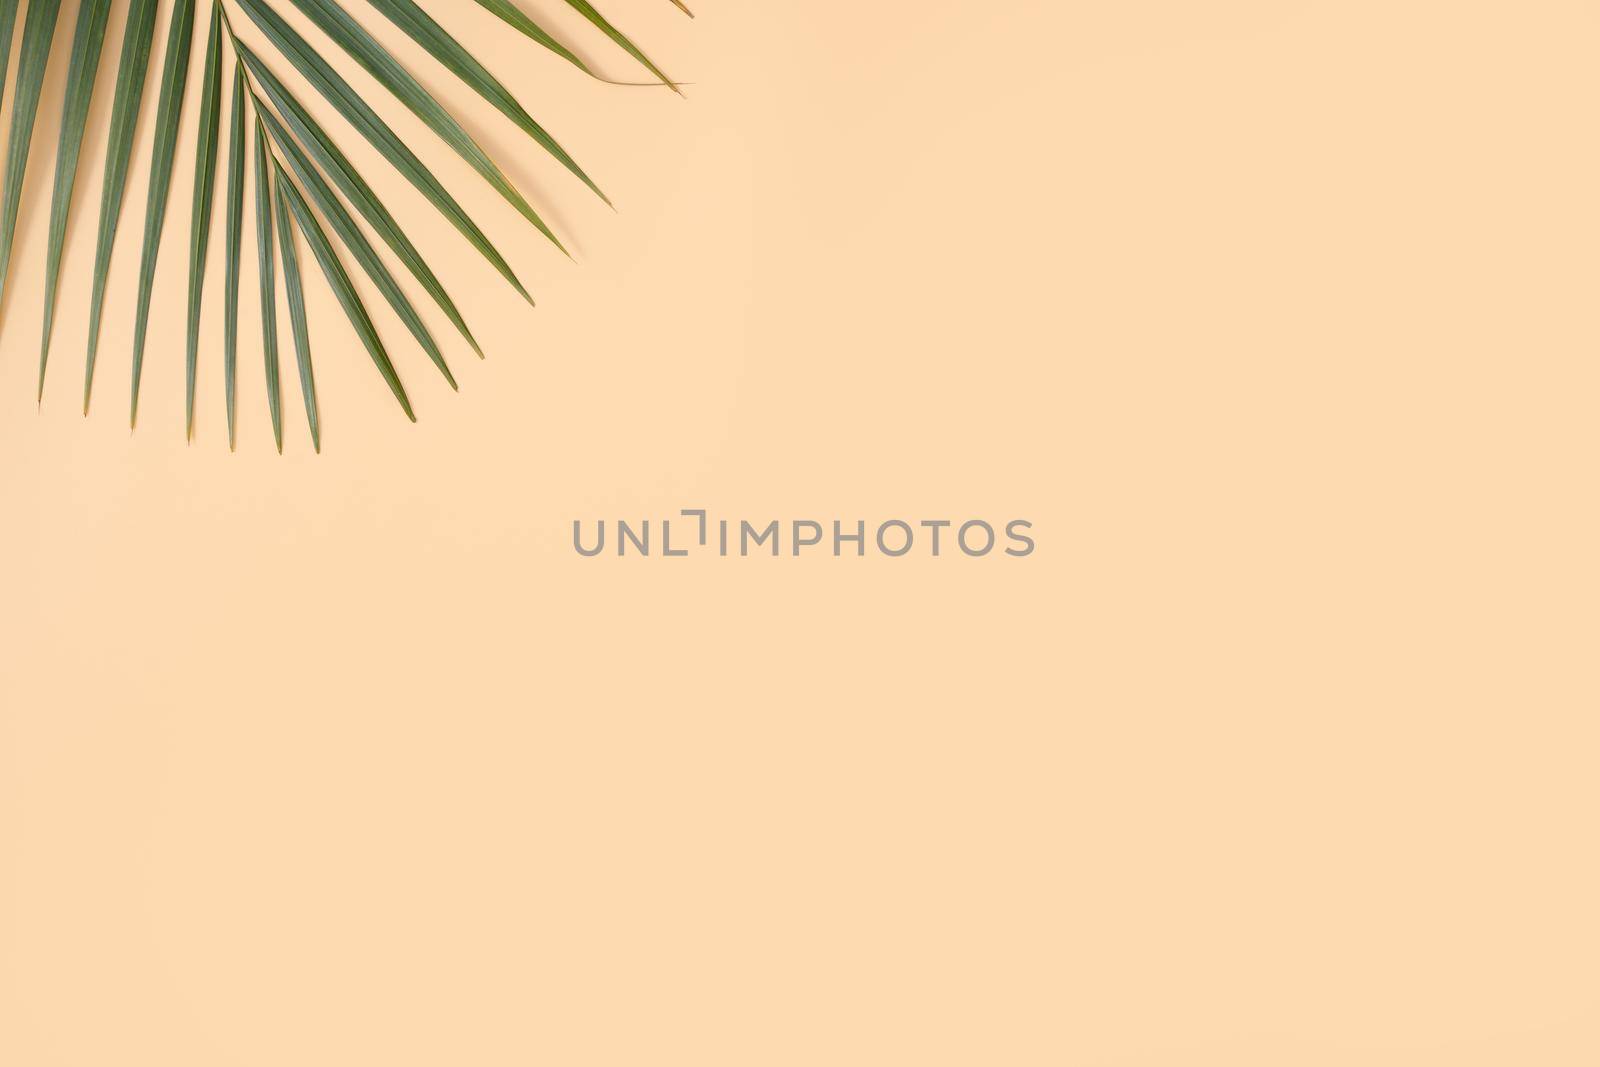 Top view of tropical palm leaves branch isolated on bright orange background with copy space.